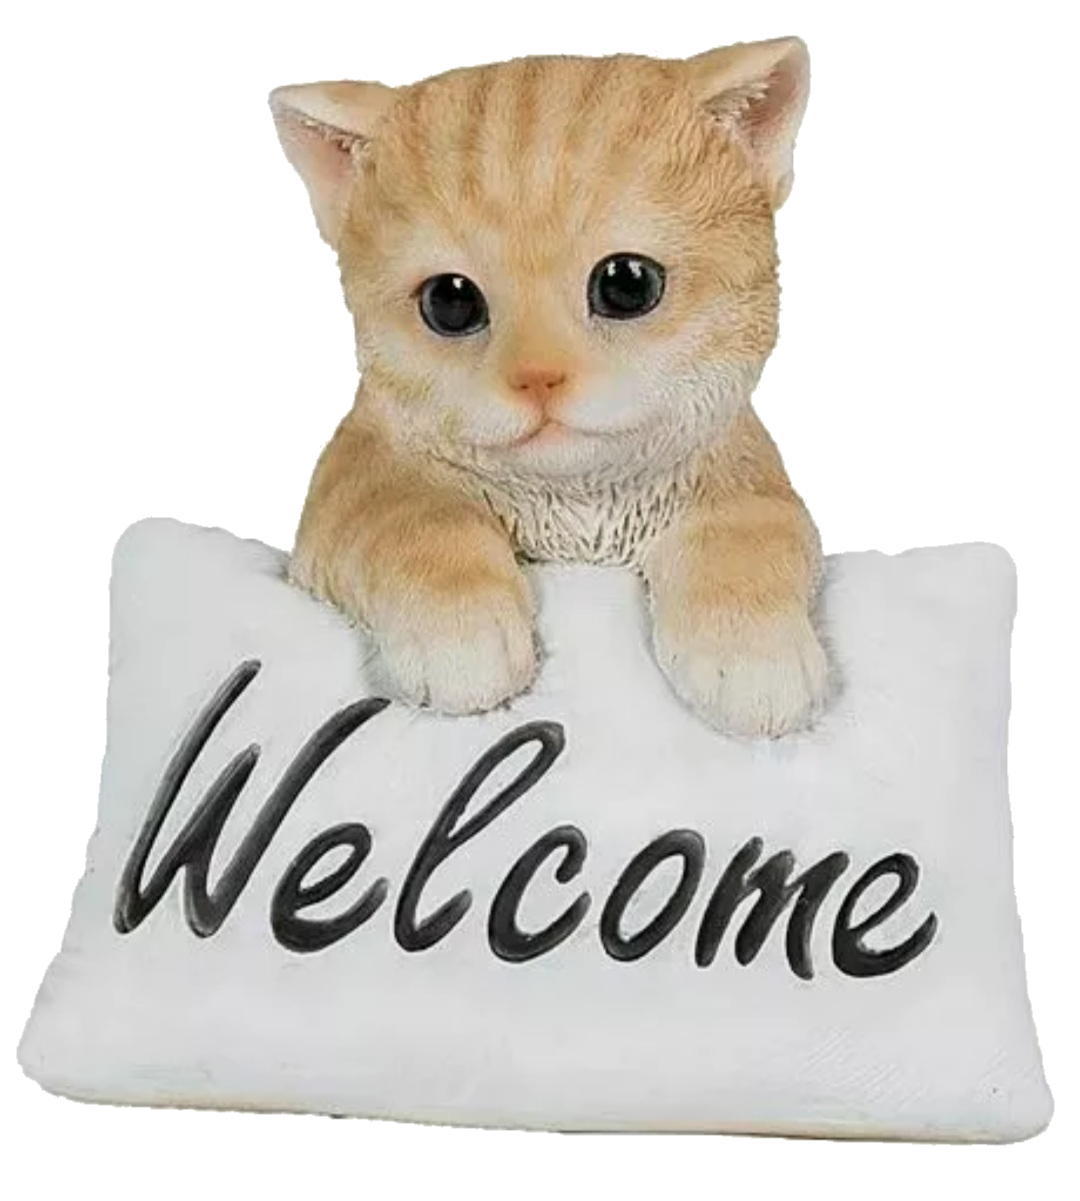 Porcelain ginger cat with a white pillow that reads 'Welcome'